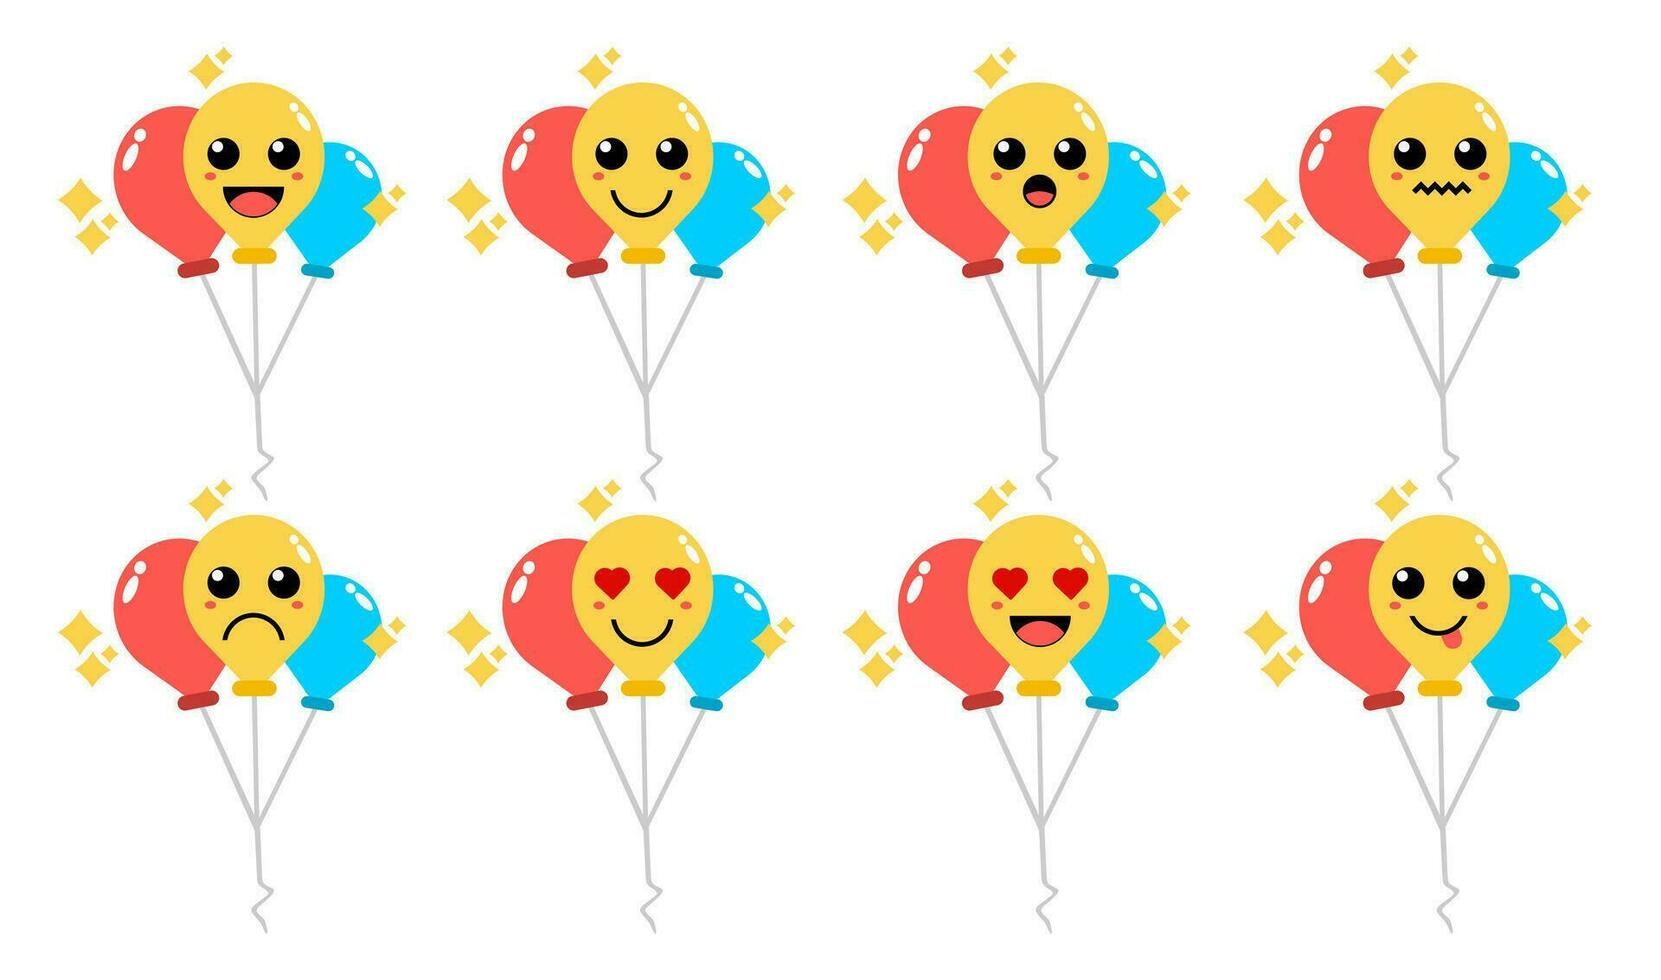 Set of cute cartoon colorful balloon with different emotions. Funny emotions character collection for kids. Fantasy characters. Vector illustrations, cartoon flat style